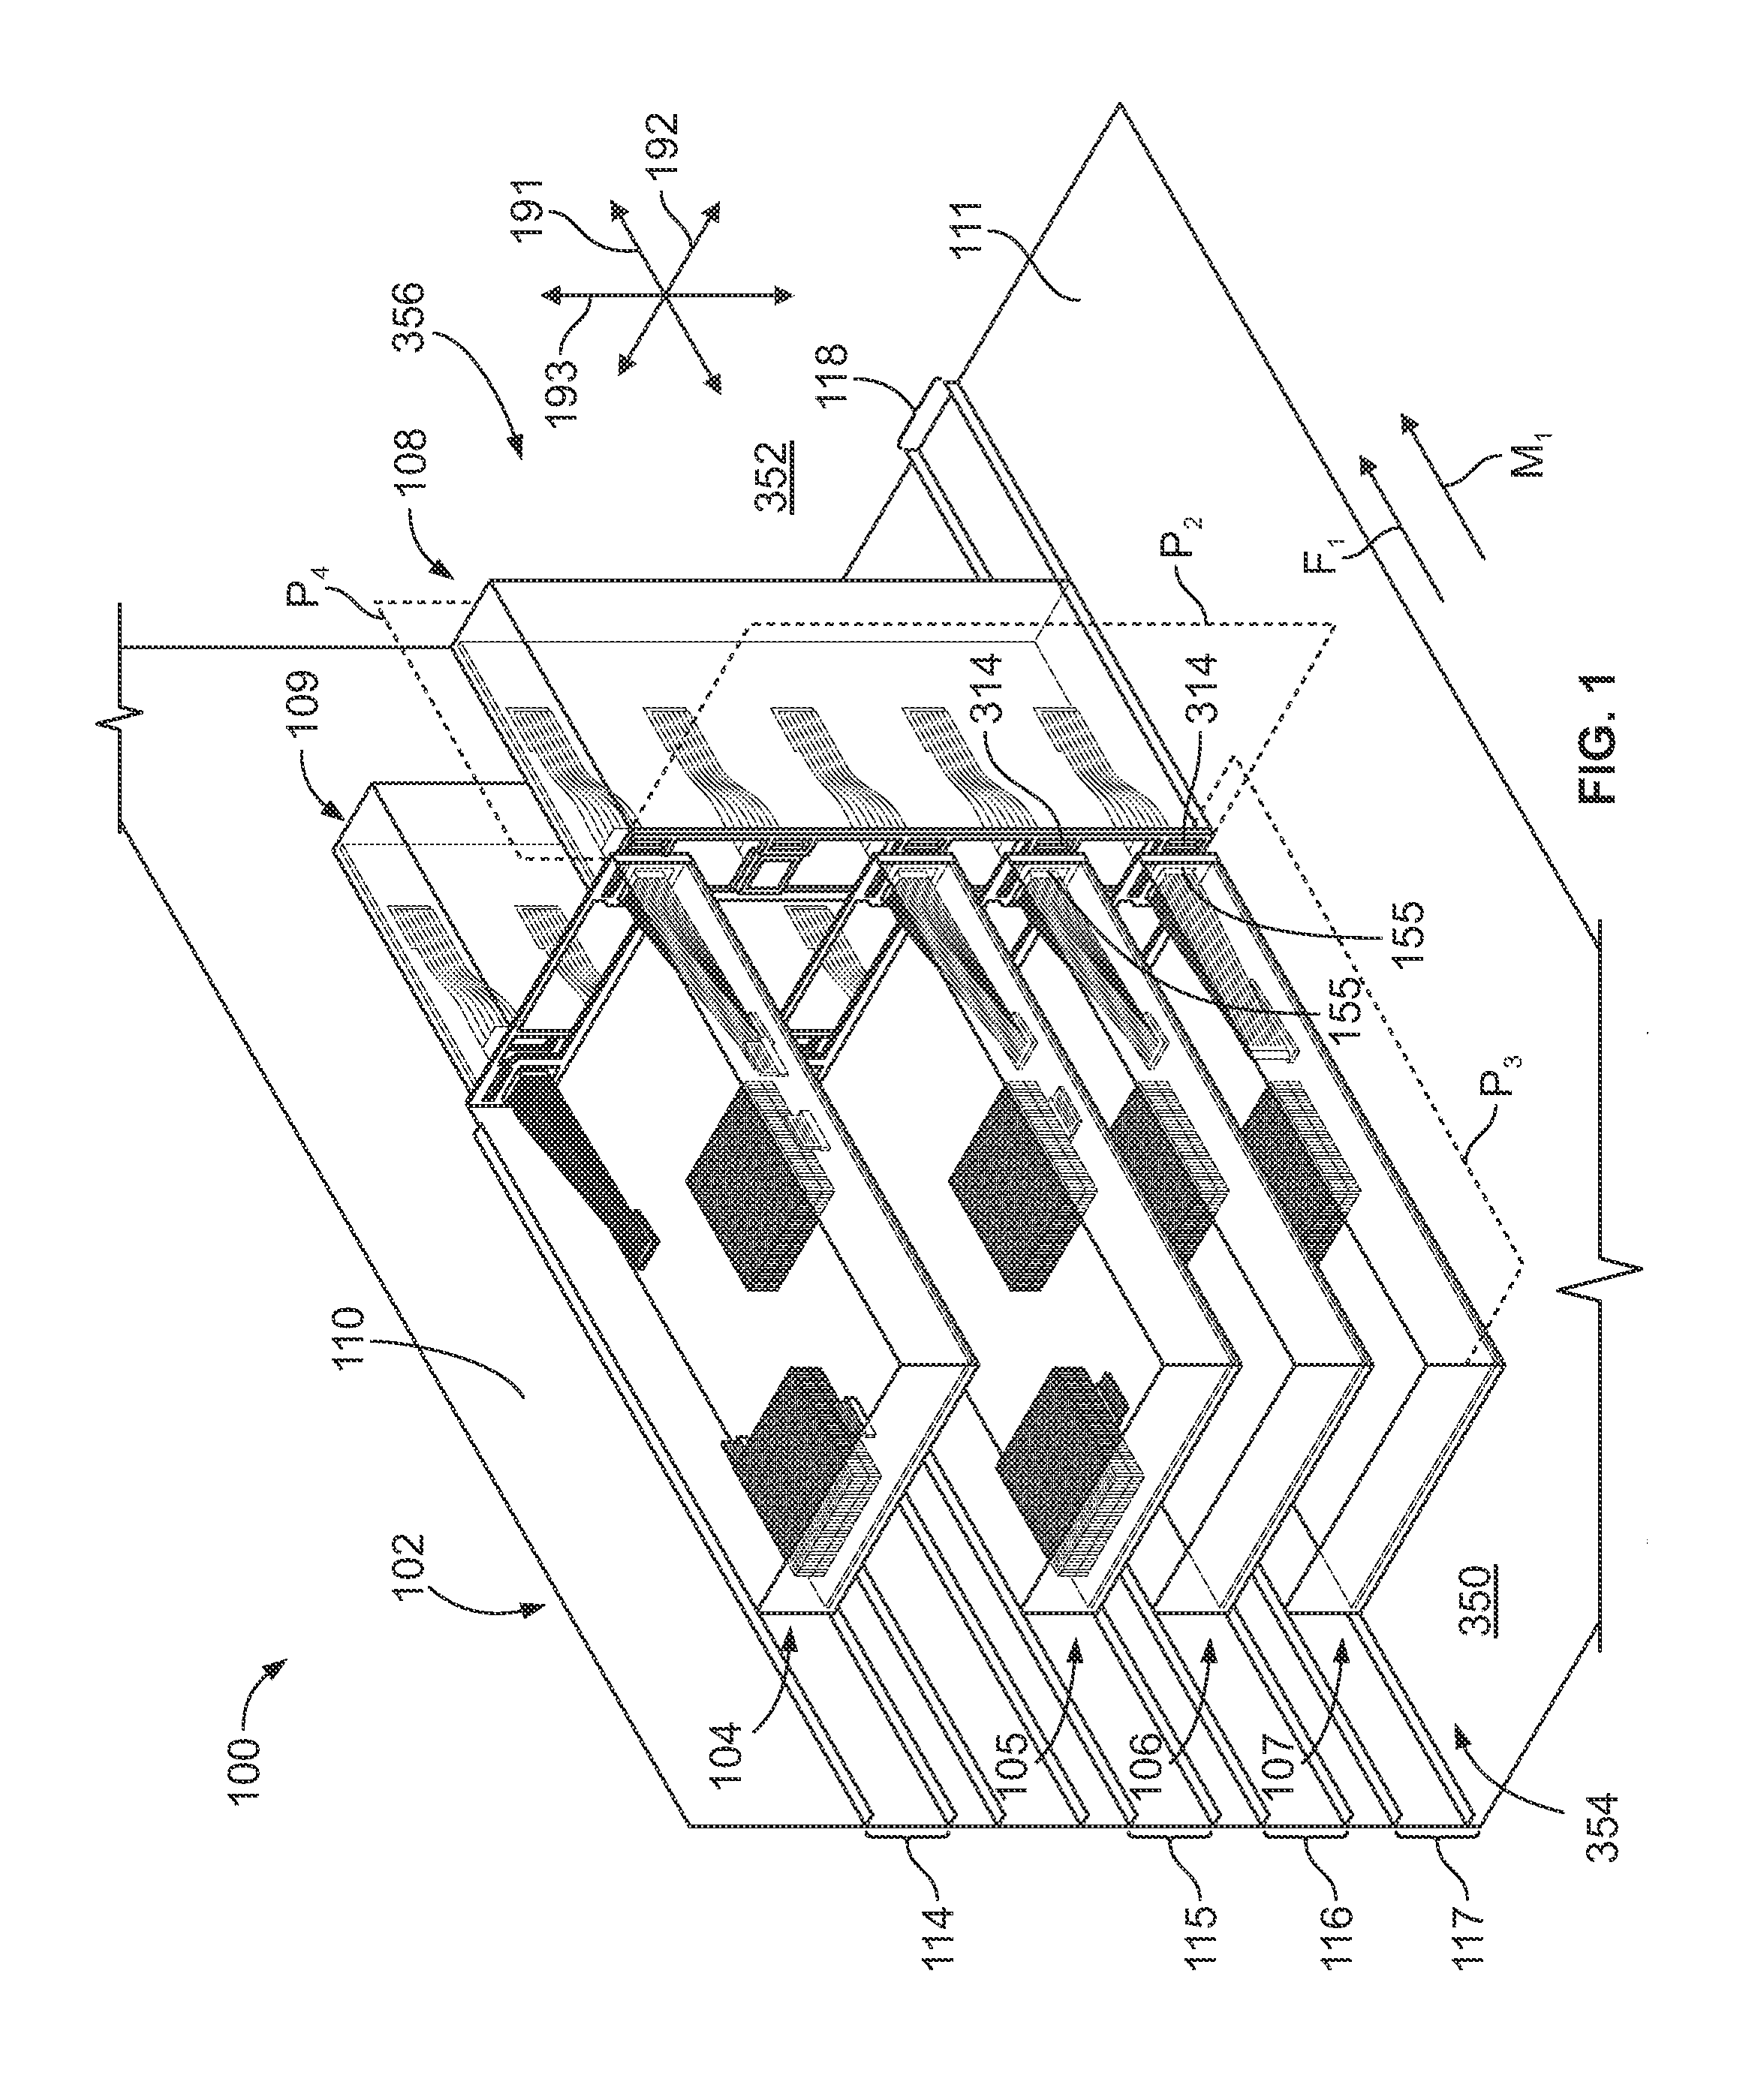 Communication modules having connectors on a leading end and systems including the same